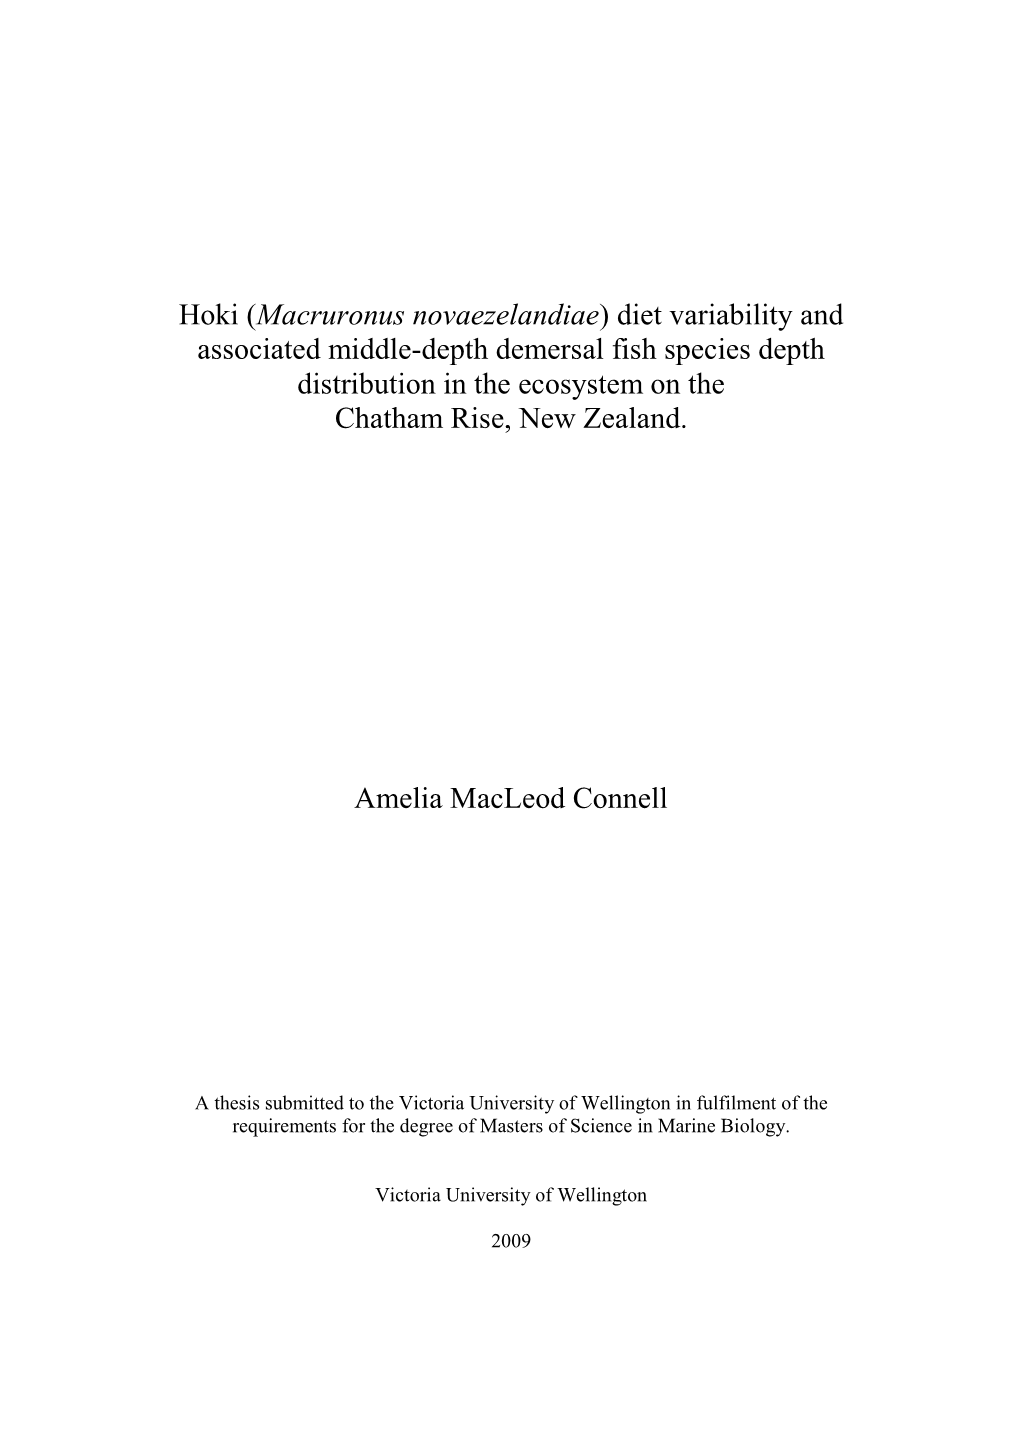 Macruronus Novaezelandiae ) Diet Variability and Associated Middle-Depth Demersal Fish Species Depth Distribution in the Ecosystem on the Chatham Rise, New Zealand